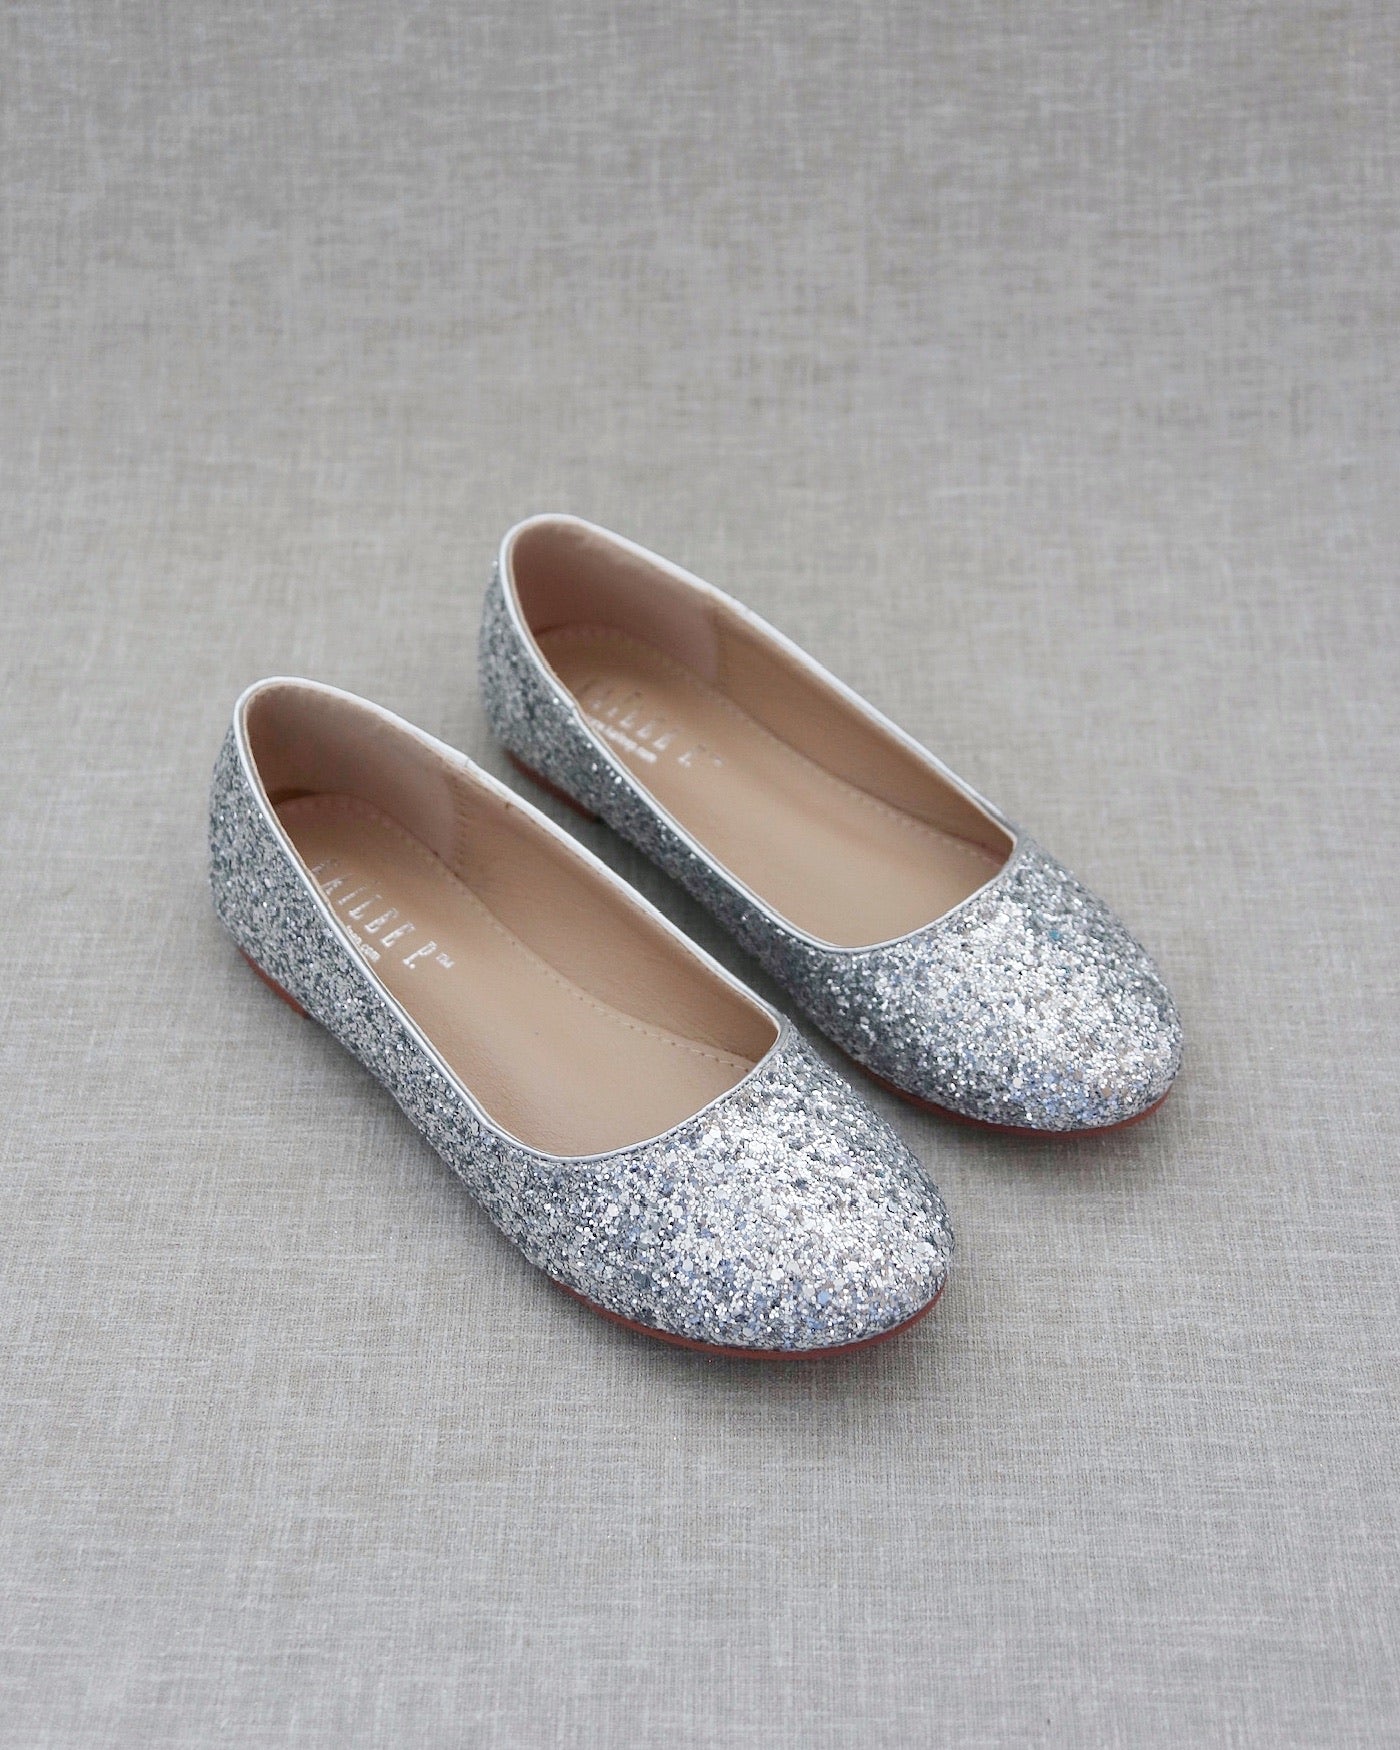 Silver Glitter Round Toe Evening Flats, Wedding Shoes, Holiday Shoes